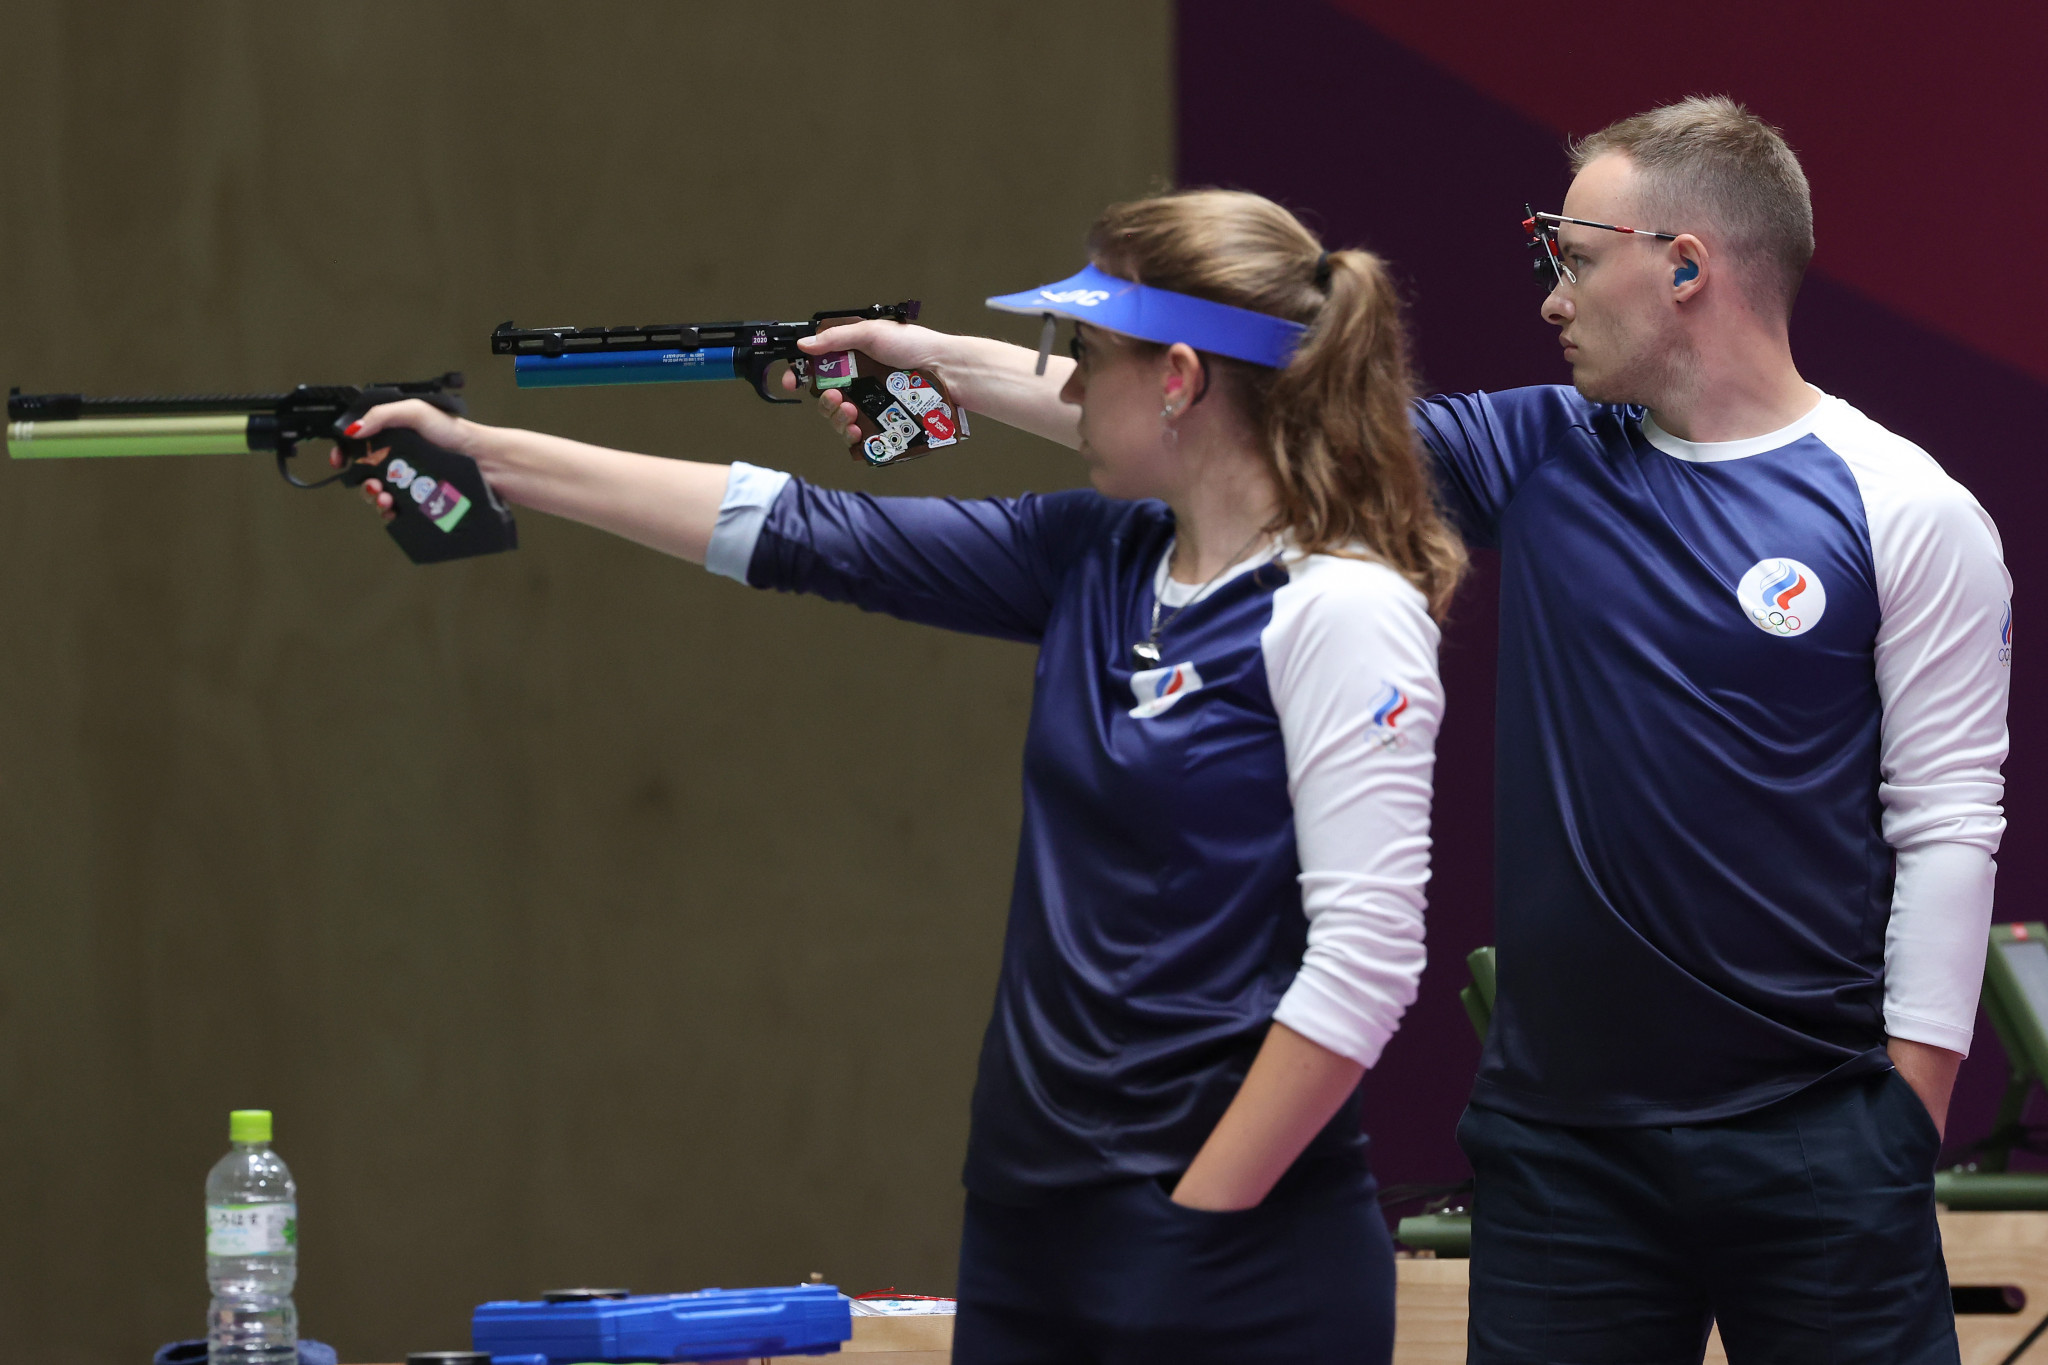 Tokyo 2020 mixed team air pistol silver medallists Vitalina Batsarashkina, left, and Artem Chernousov, right, earned victory for Russia in the mixed team air pistol event at the ISSF 10m Grand Prix in Osijek ©Getty Images